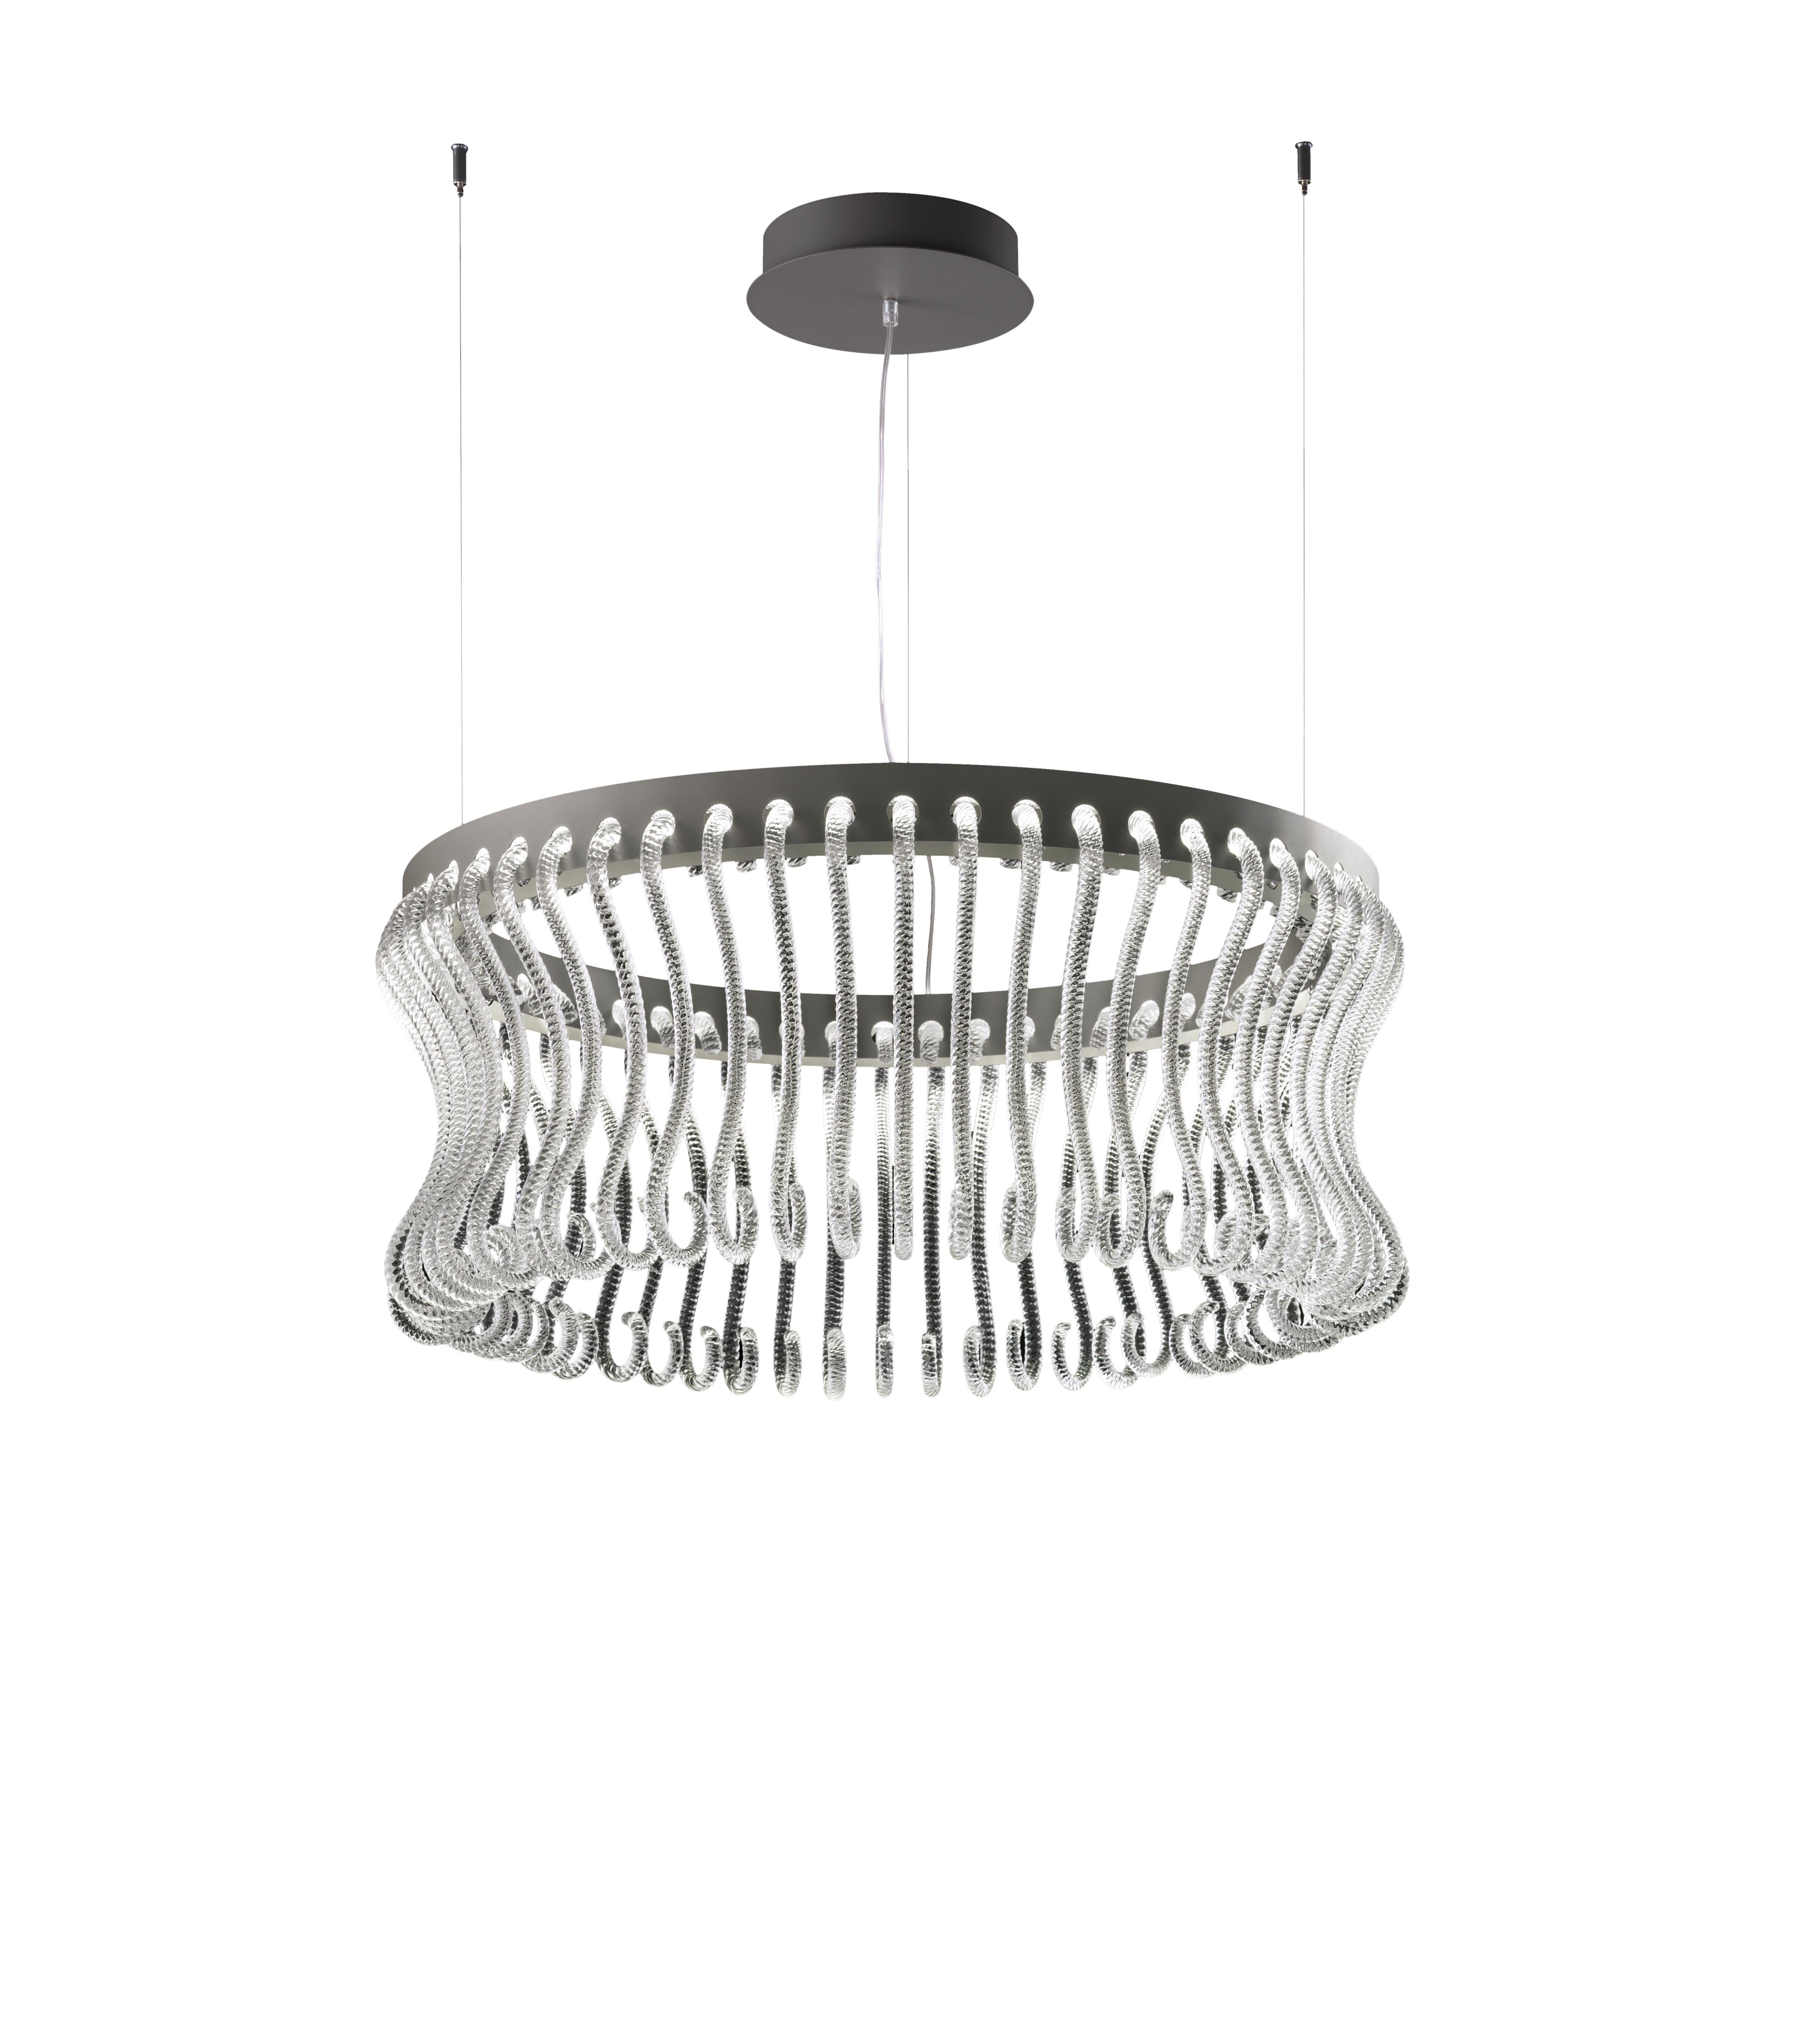 Originally designed in 2017 by Brian Rasmussen, here you are shown the Crown 7335 Suspension Lamp in Crystal Glass and Painted Grey Finish. The pastoral is a full-glass decorative element, characteristic of the Venetian chandelier which has become